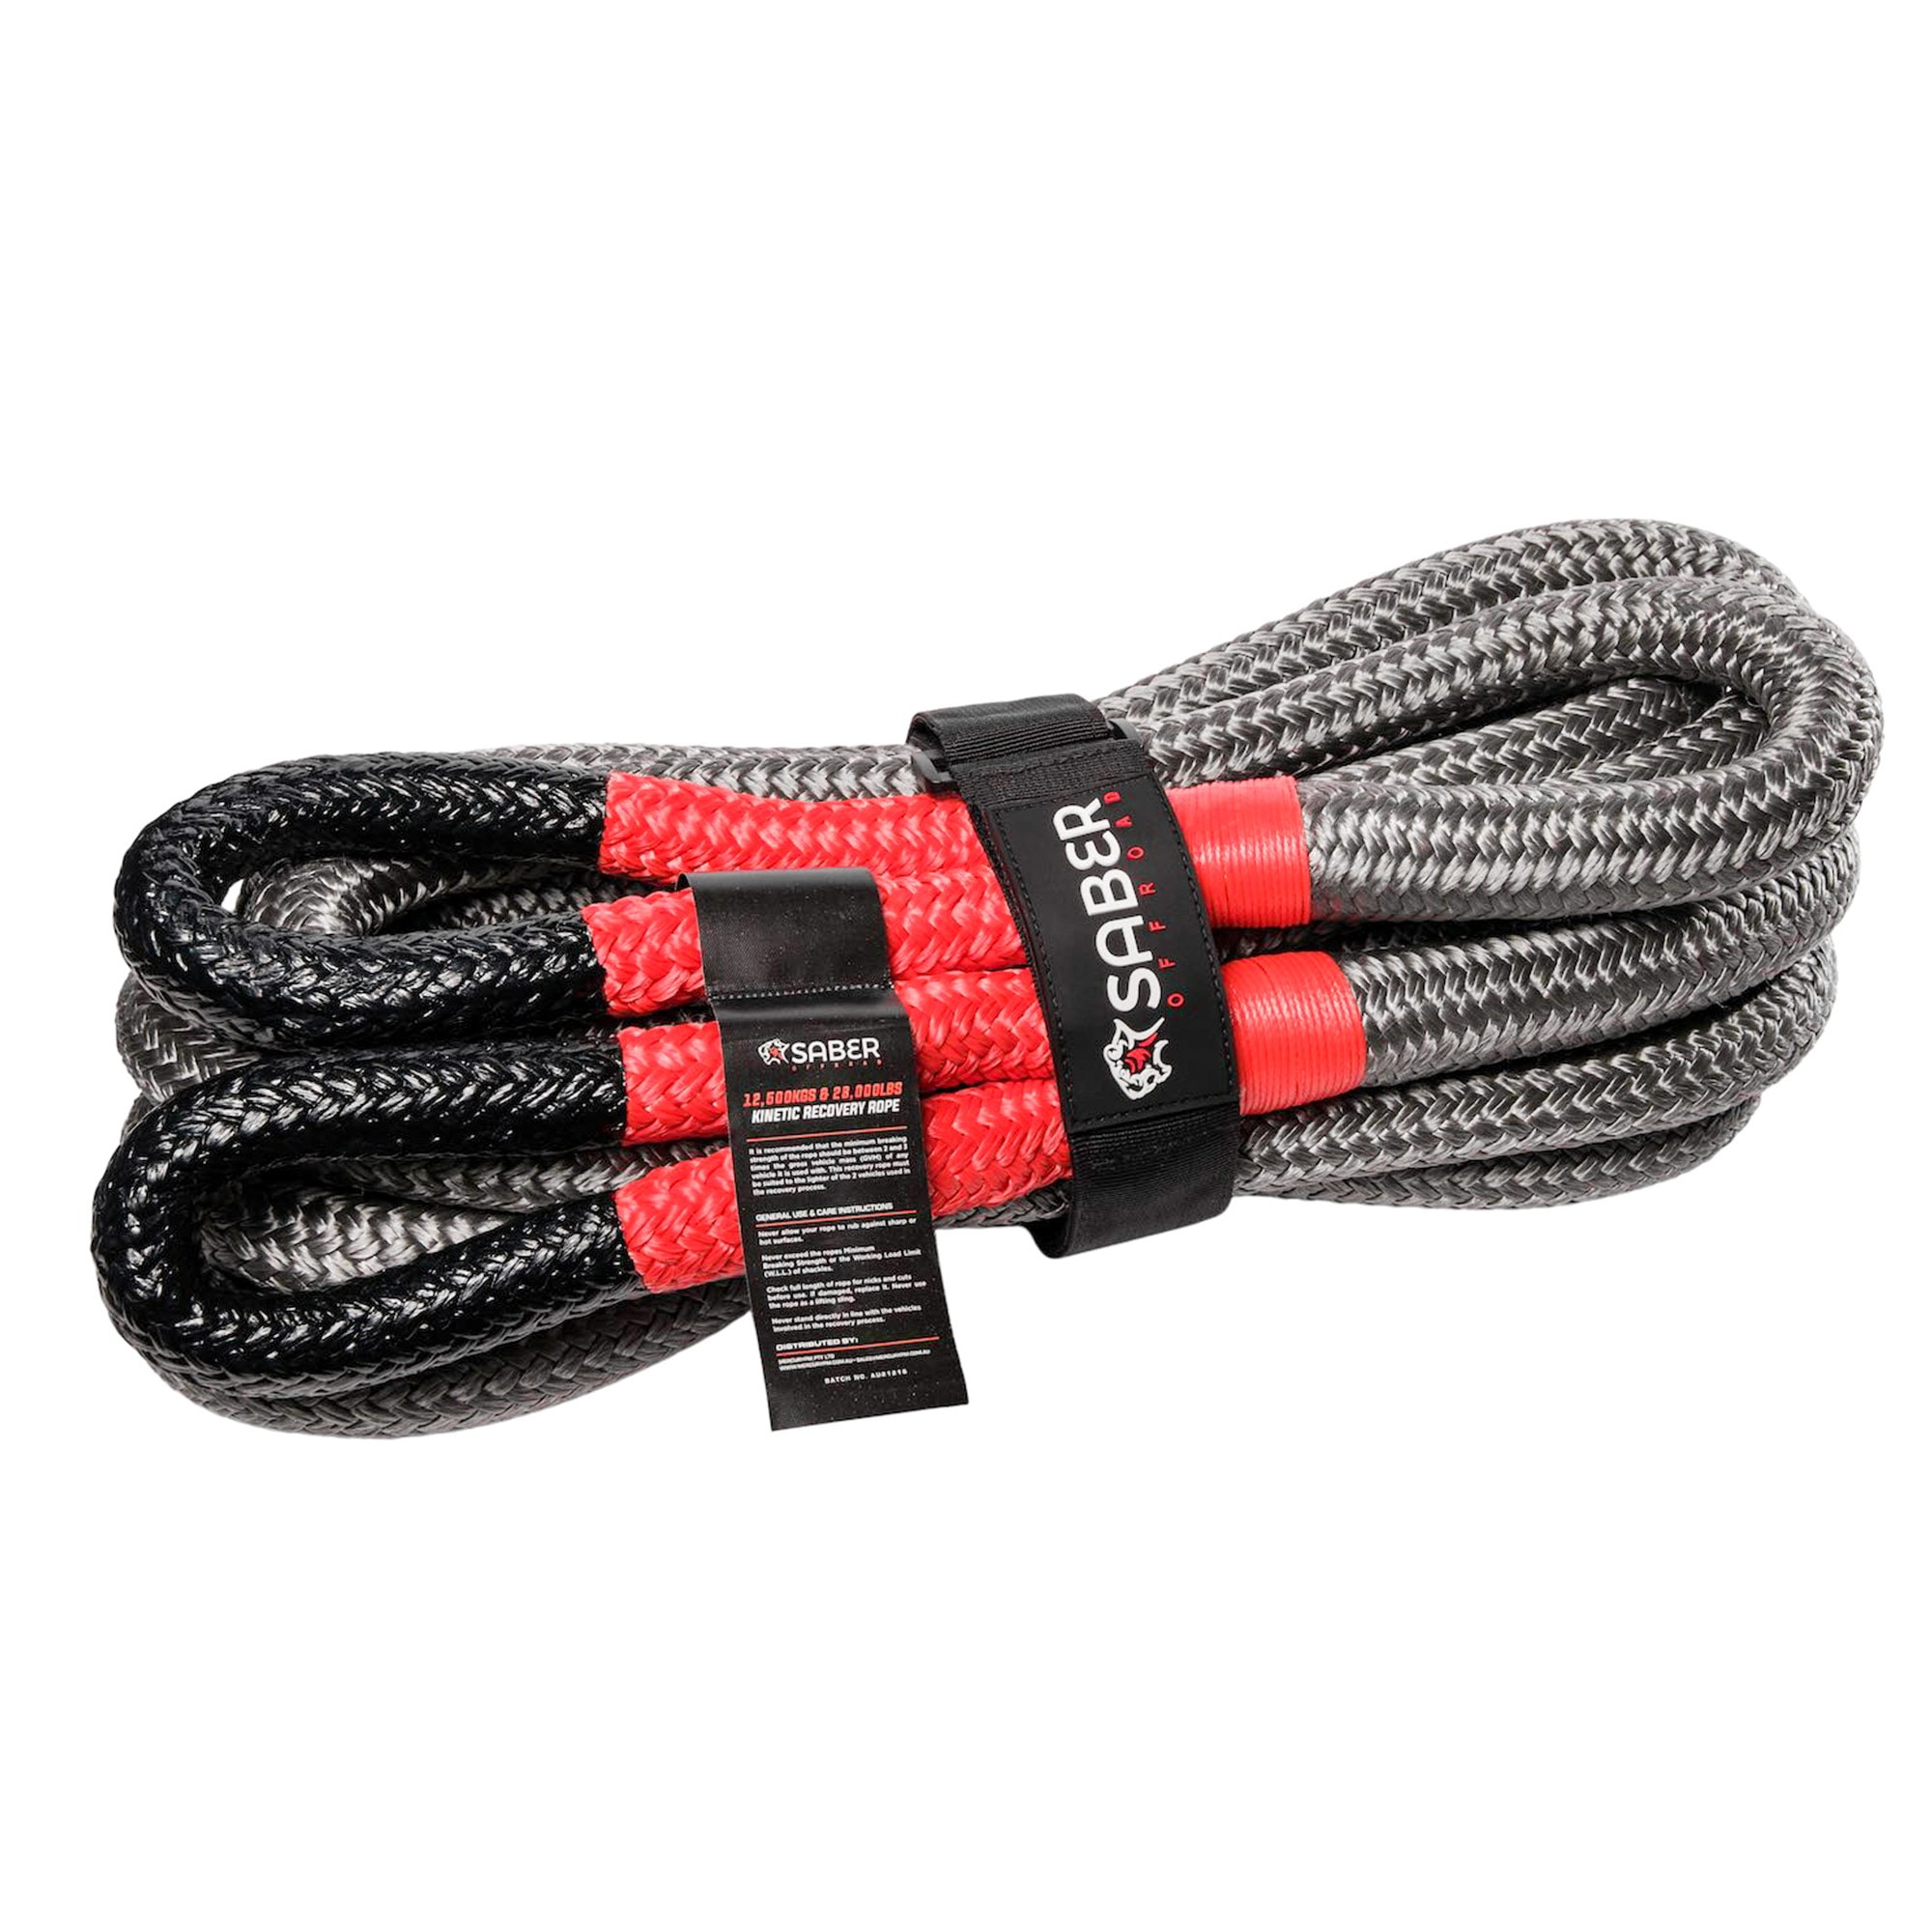 2. 12500KG Kinetic Recovery Rope SBR 12KRR